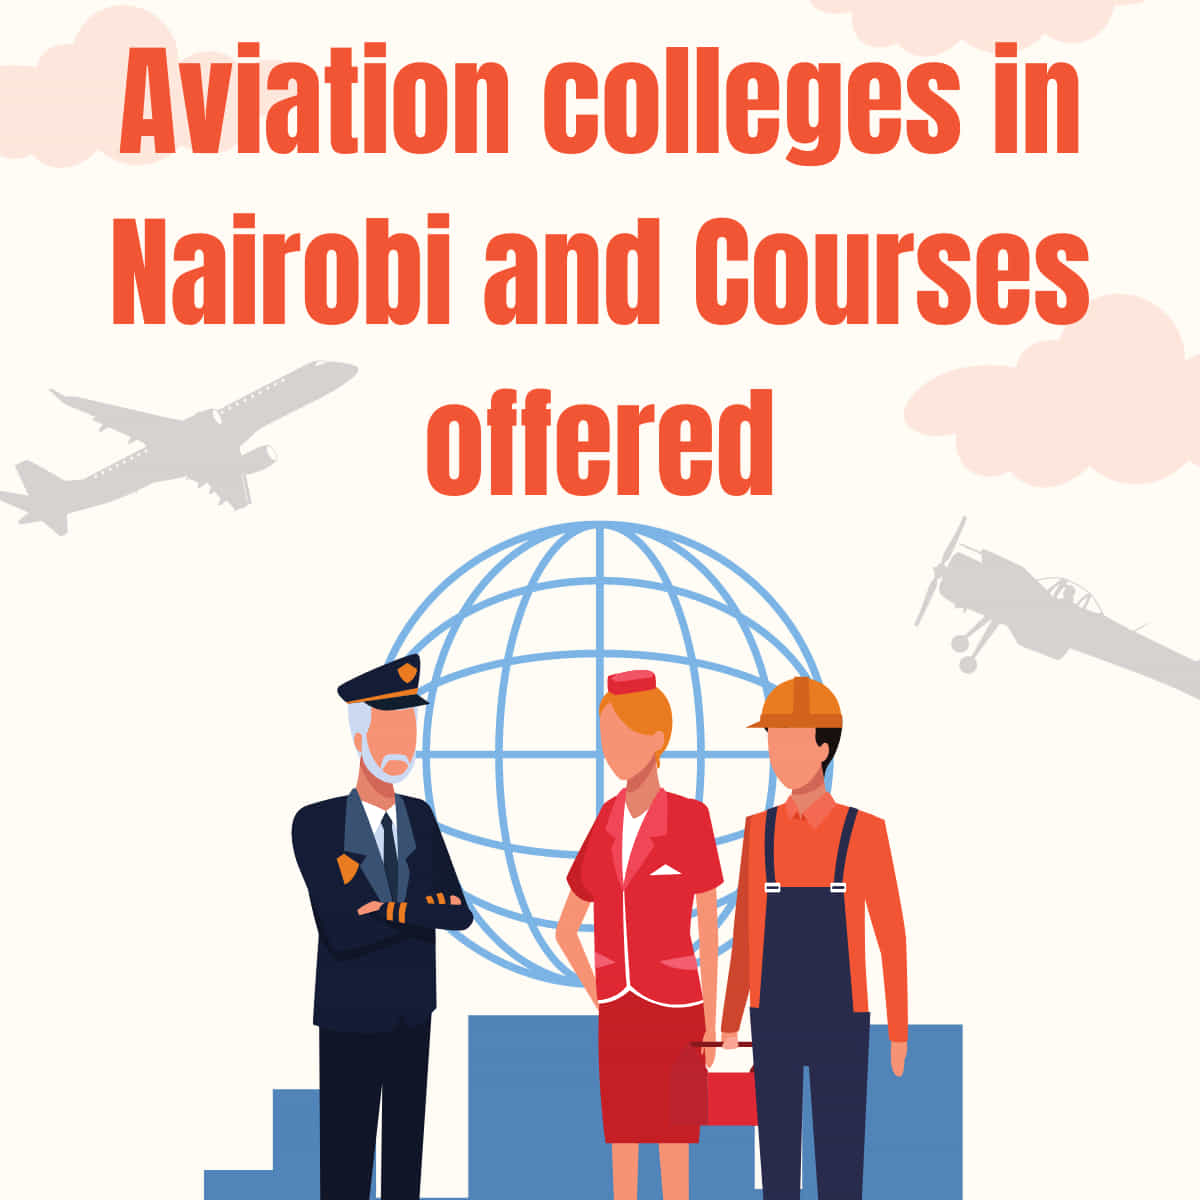 Aviation colleges in Nairobi